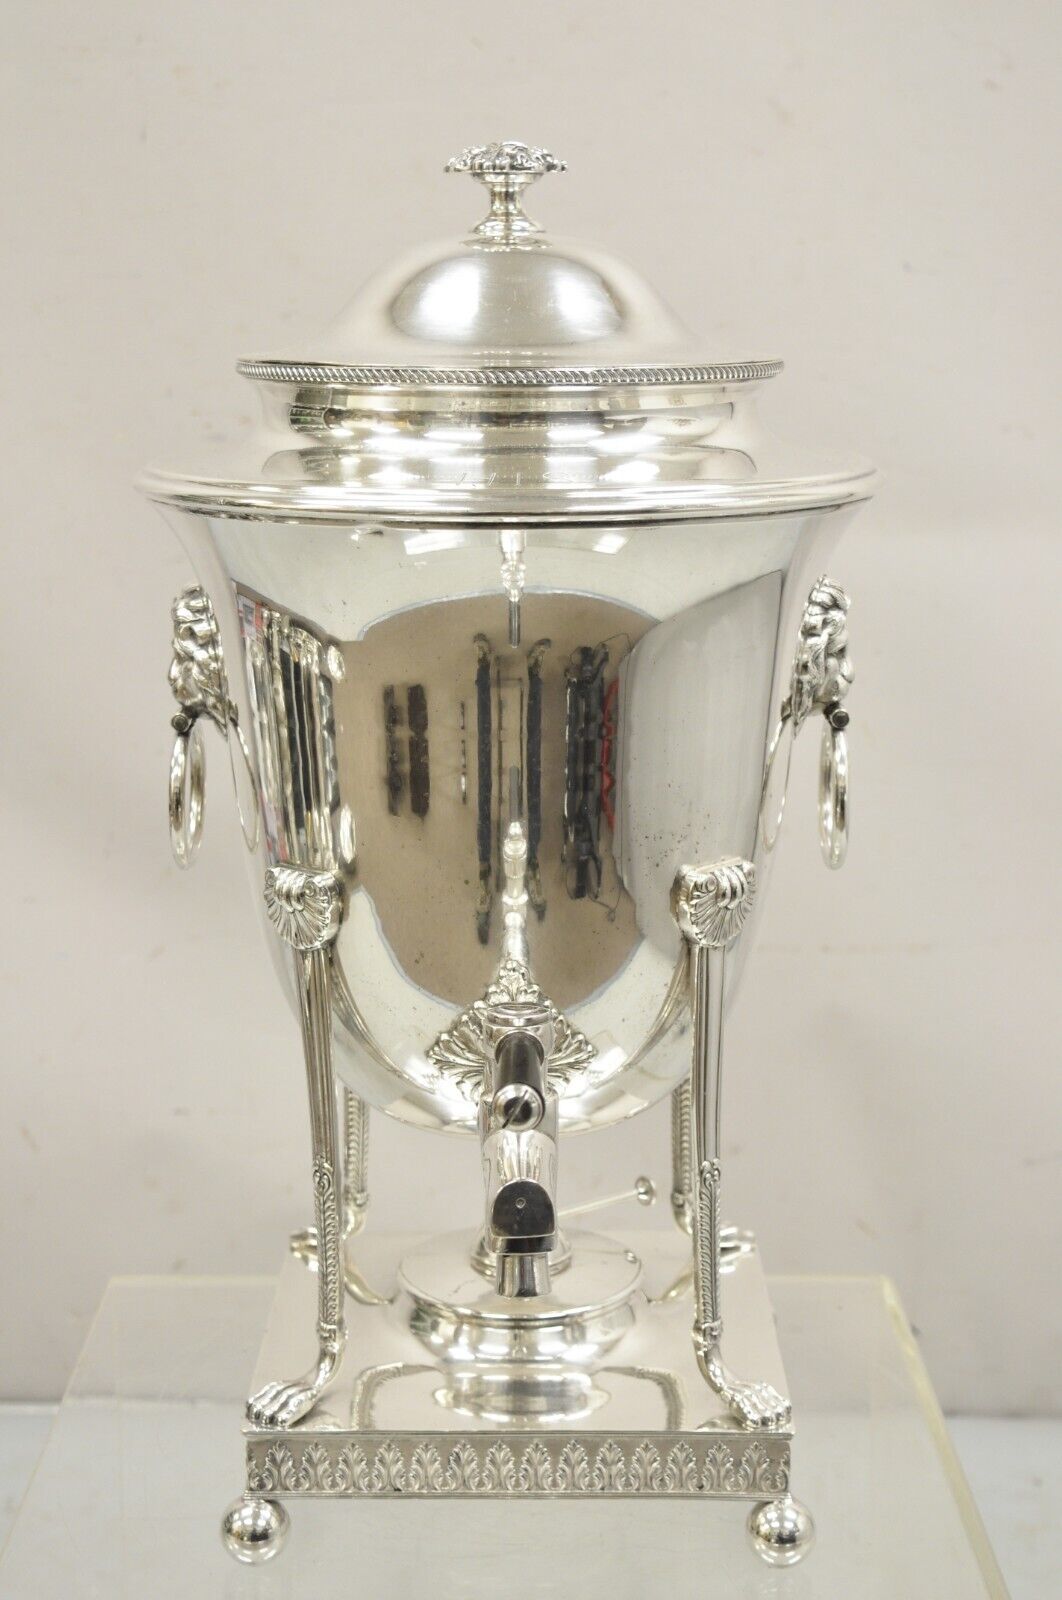 19th C. English Silver Plated Regency Paw Foot Samovar with Lions by Folgate